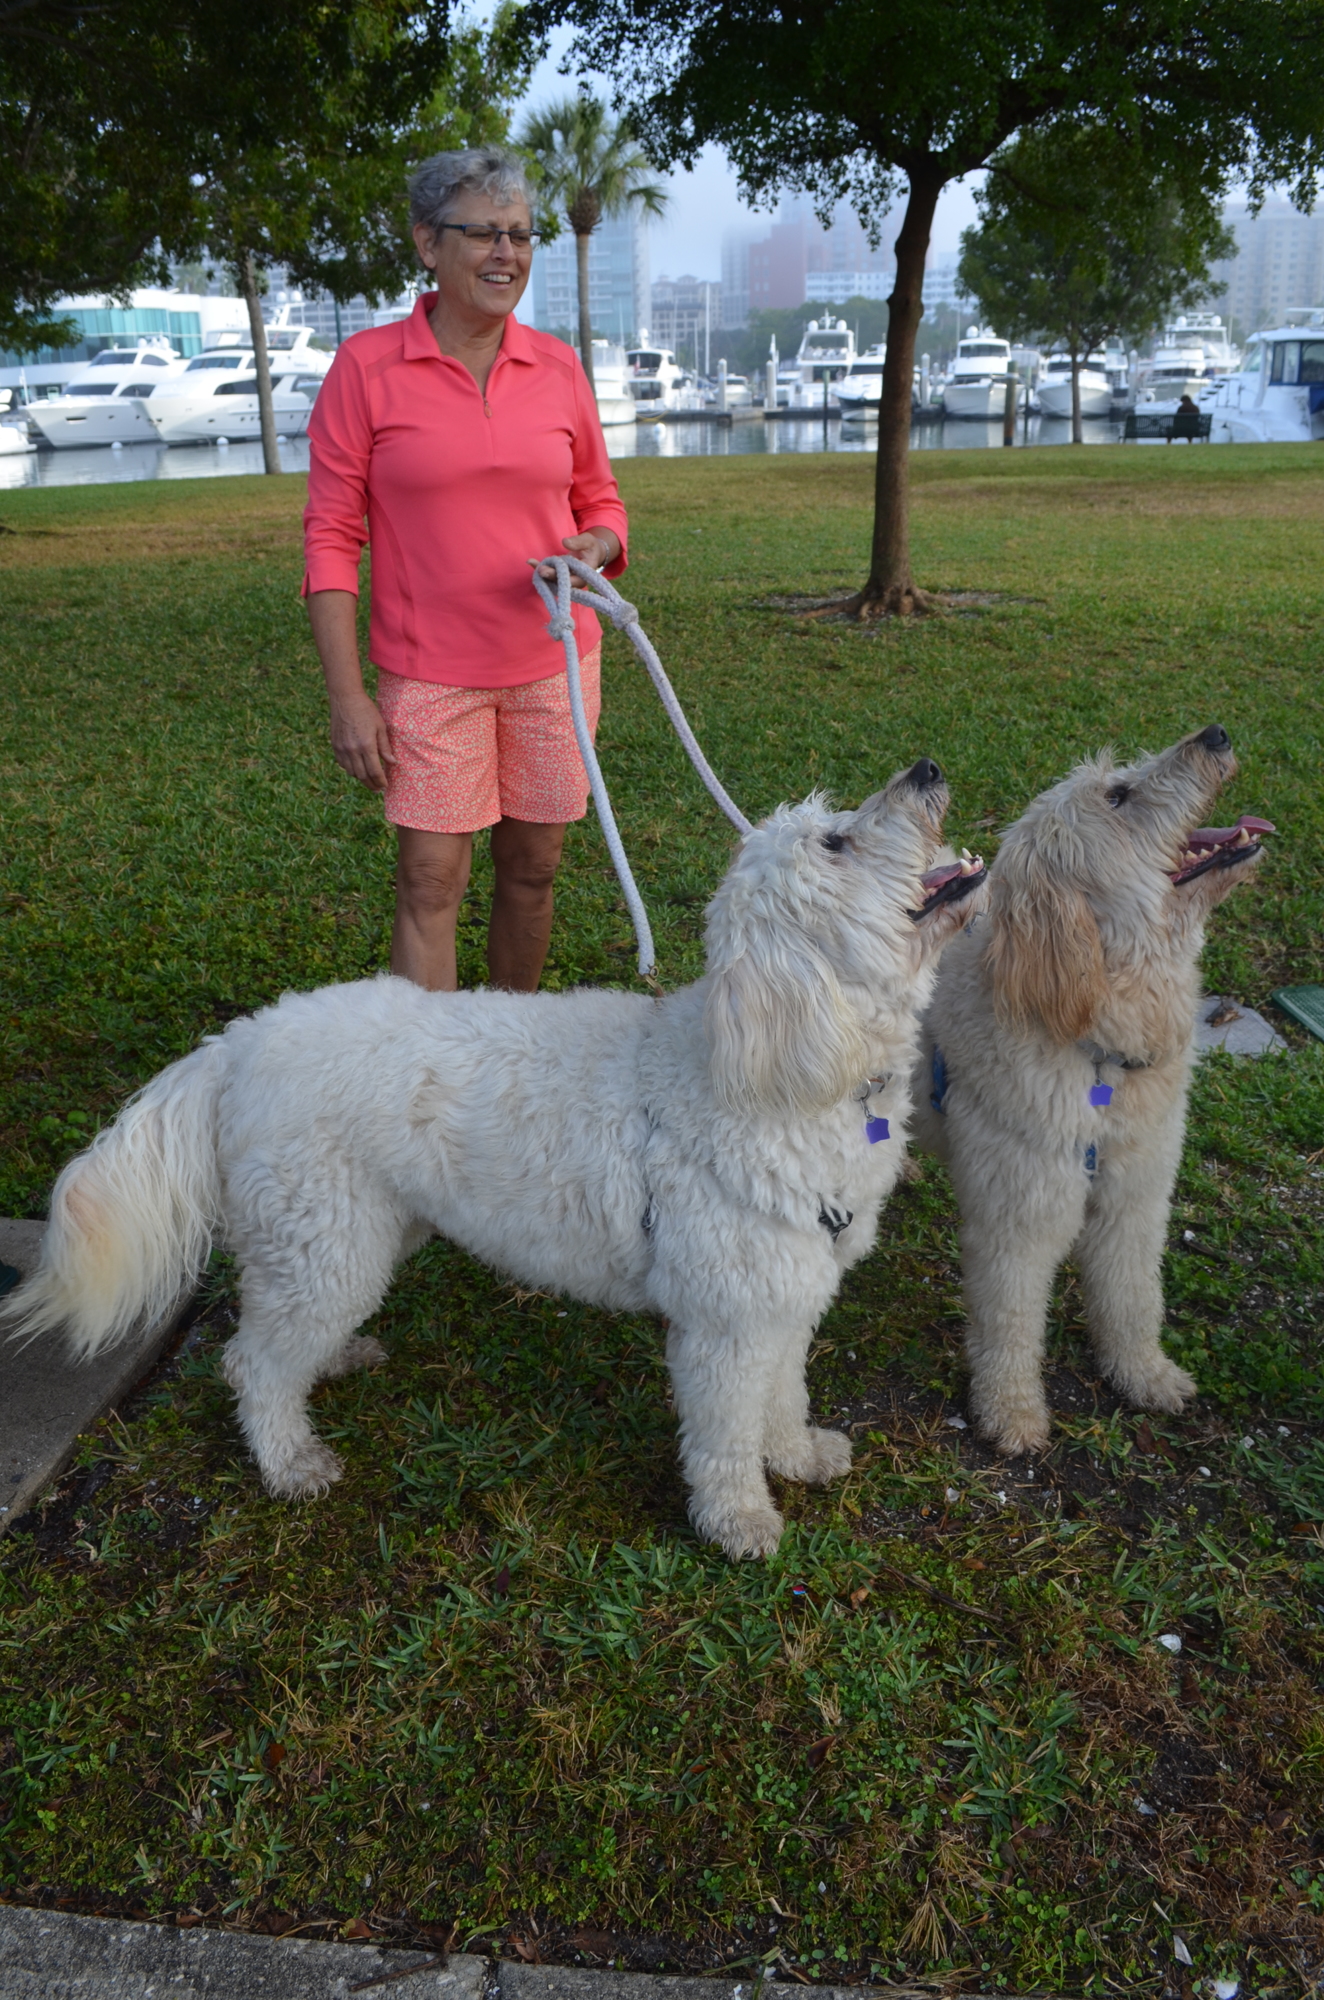 Mary Nolan takes her goldendoodles Otis and Mozy to Bayfront Park, where they're entranced by the squirrels that roam the park.